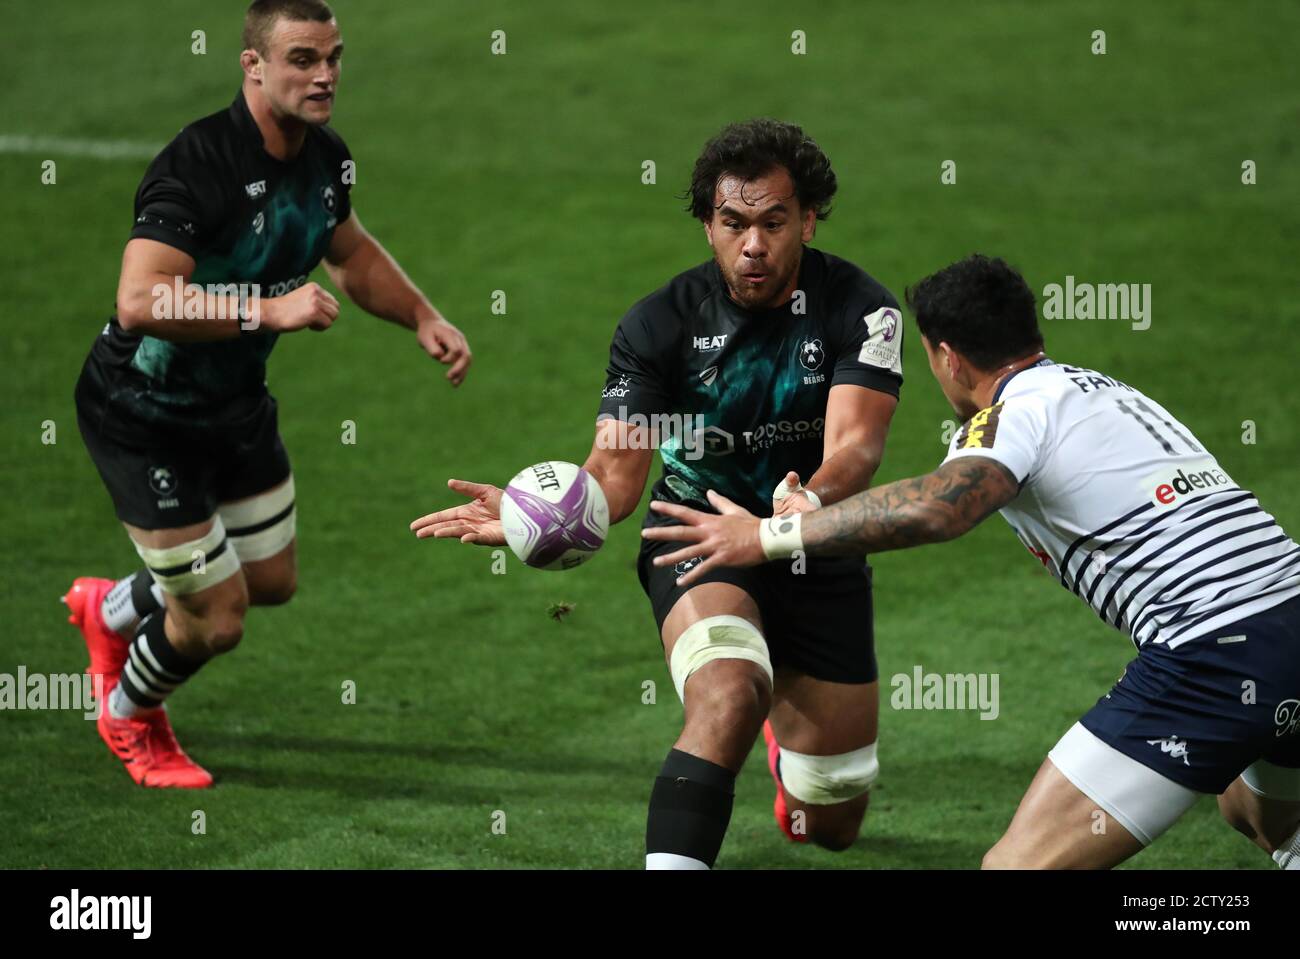 Bristol Bears' Steven Luatua (centre) passes the ball during the European Challenge Cup semi final match at Ashton Gate, Bristol. Picture date: Friday September 25, 2020. See PA story RUGBYU Bristol. Photo credit should read: David Davies/PA Wire. Stock Photo